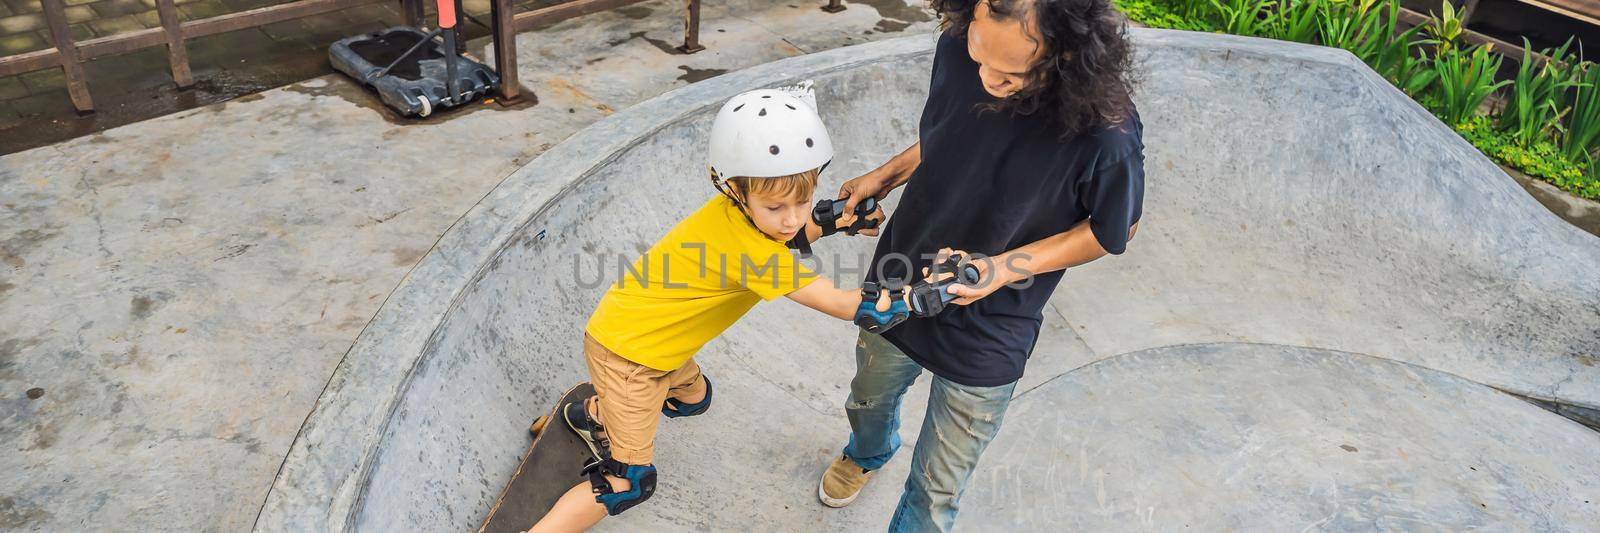 Athletic boy learns to skateboard with asian trainer in a skate park. Children education, sports. Race diversity BANNER, LONG FORMAT by galitskaya